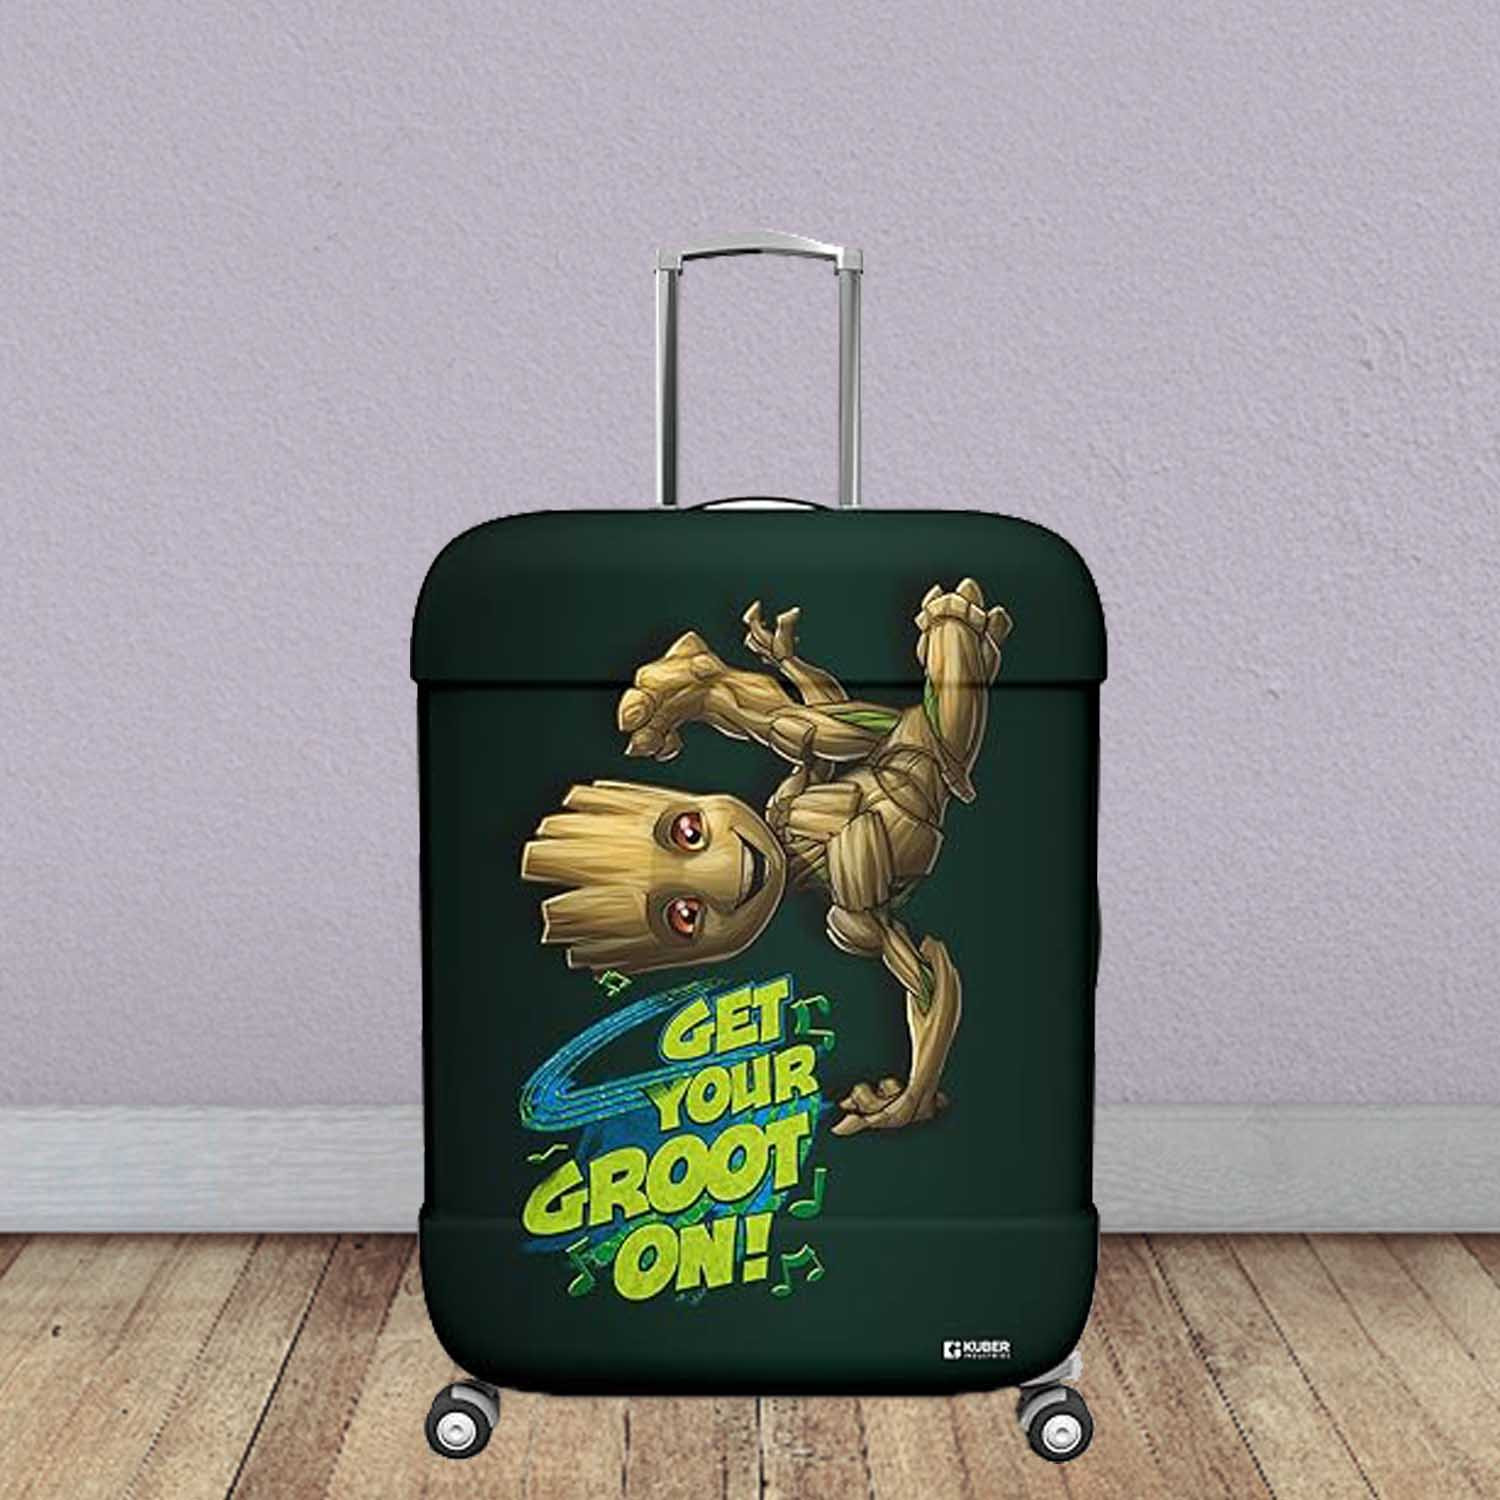 Kuber Industries Marvel I Am Groot Luggage Cover | Polyester Travel Suitcase Cover | Washable | Stretchable Suitcase Protector | 18-22 Inch | Small | Green